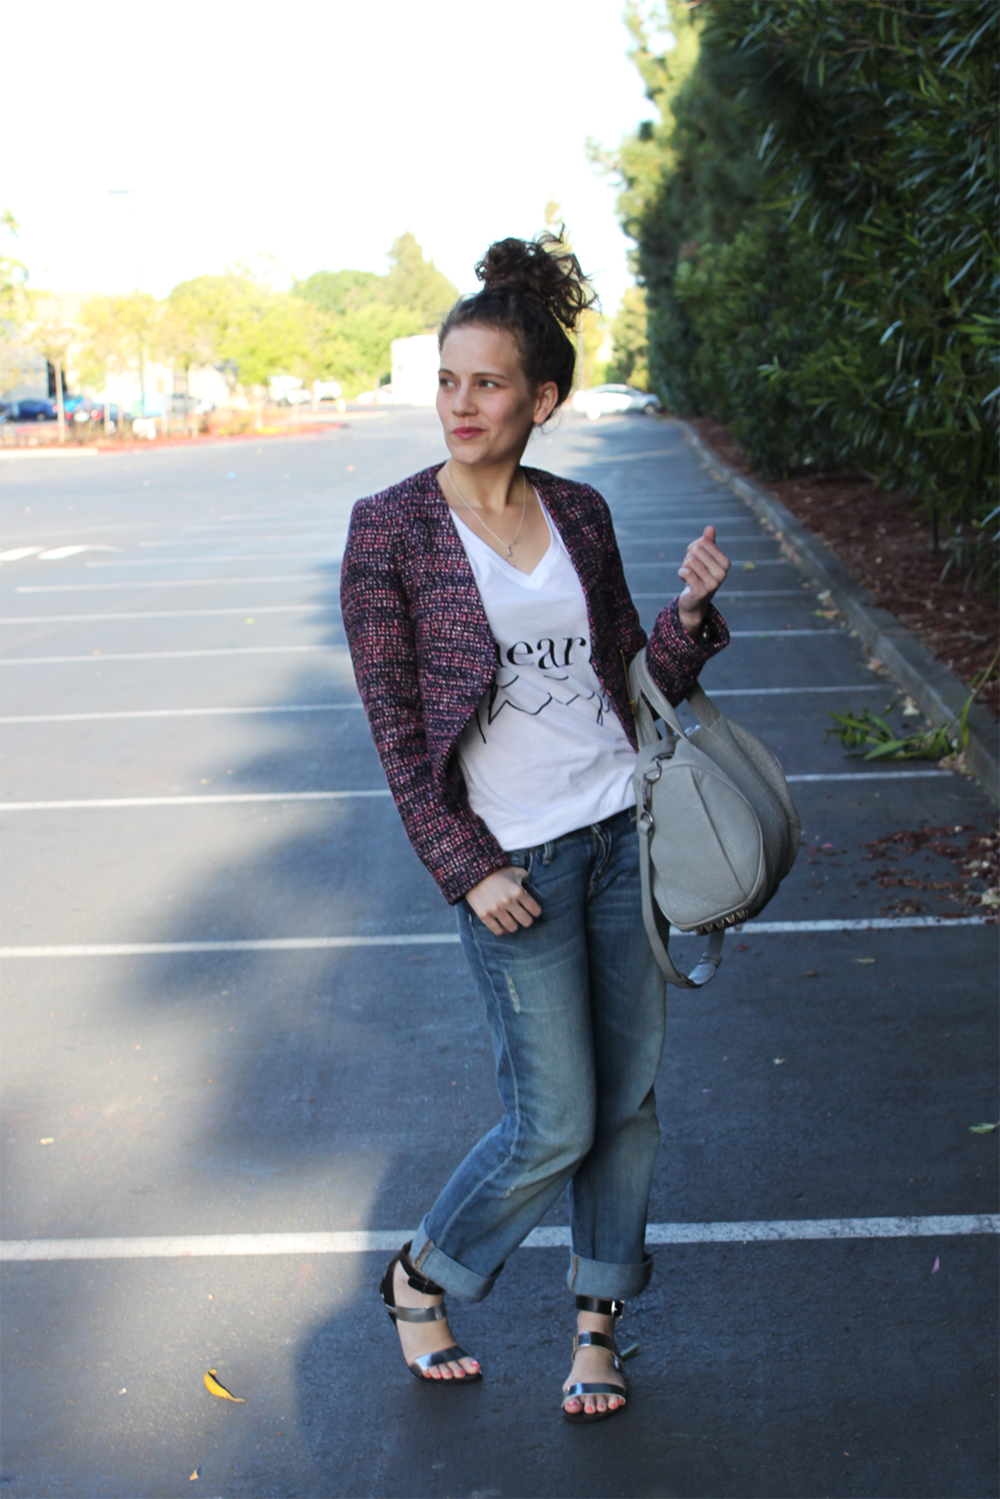 #heart this tee - casual weekend style - sf style blogger kate franco